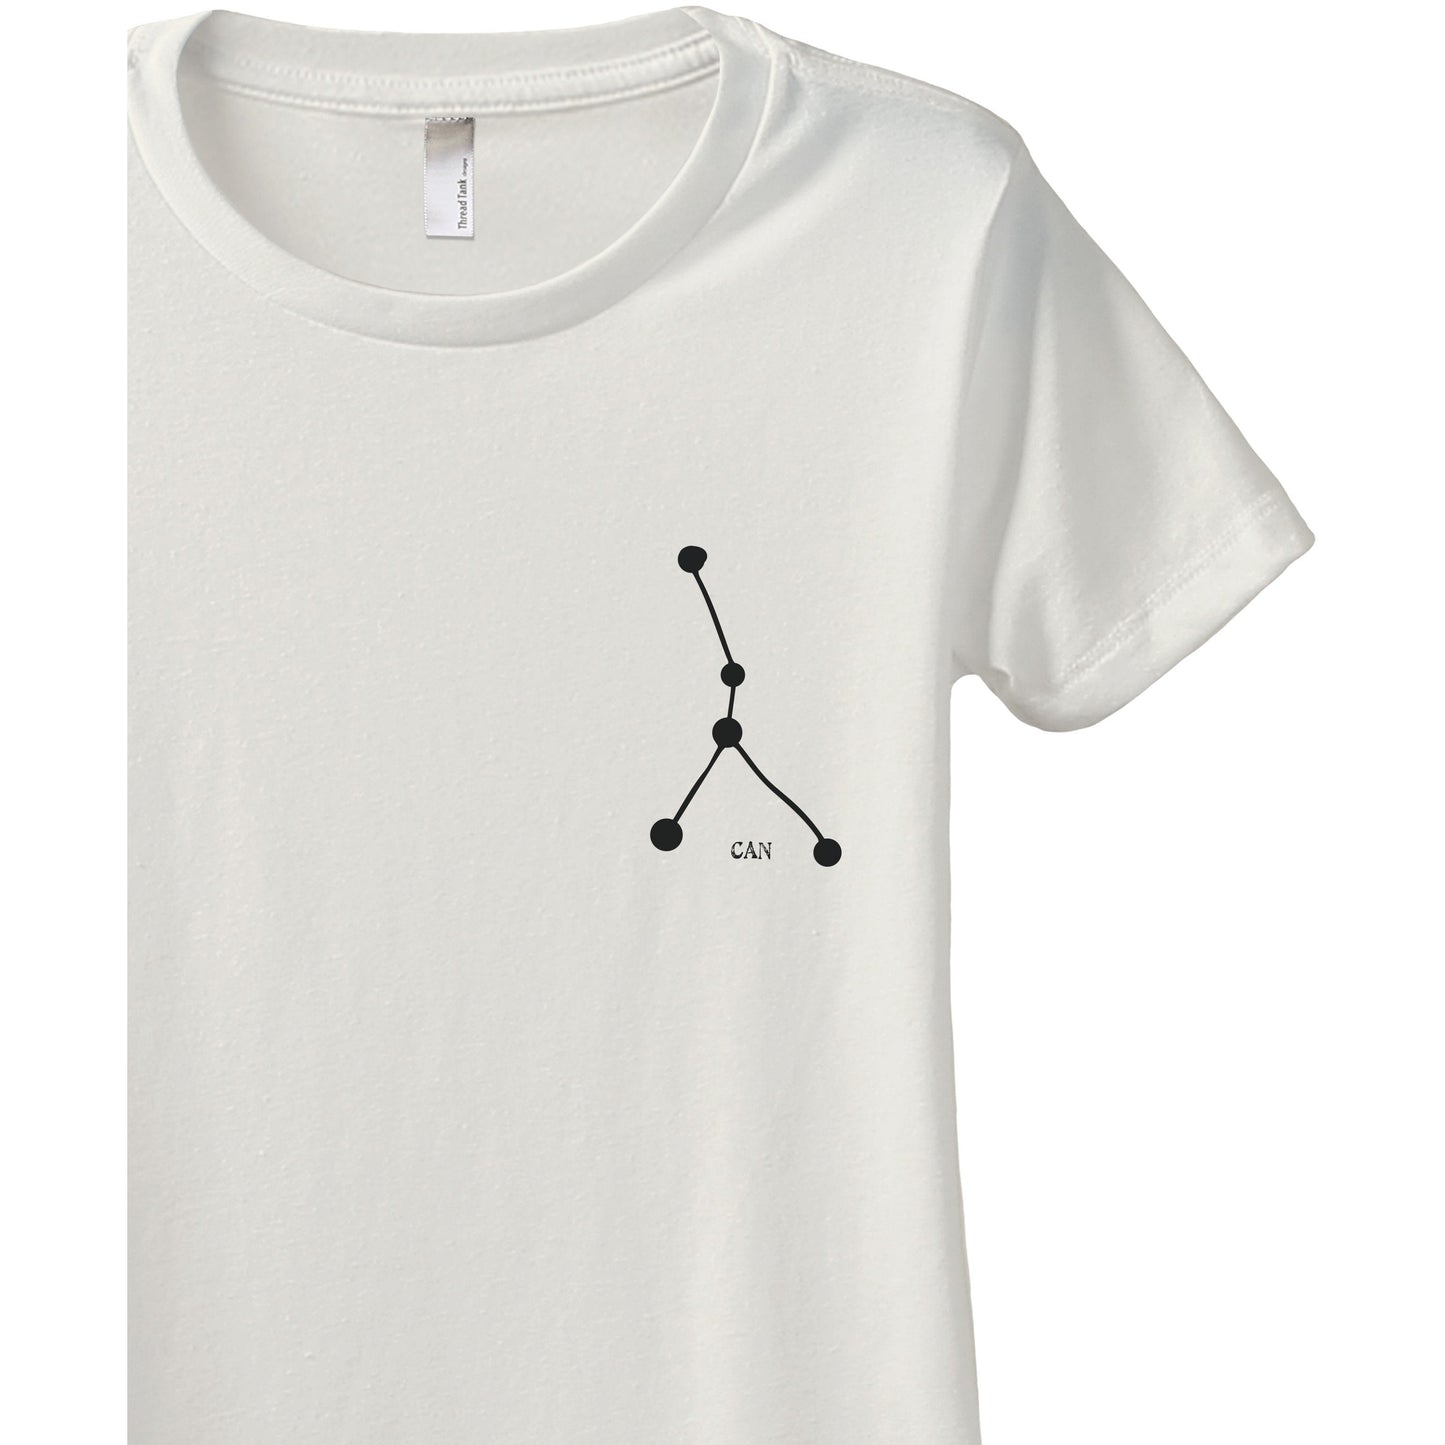 Cancer CAN Constellation Astrology Women's Relaxed Crewneck T-Shirt Top Tee Vintage White Zoom Details
